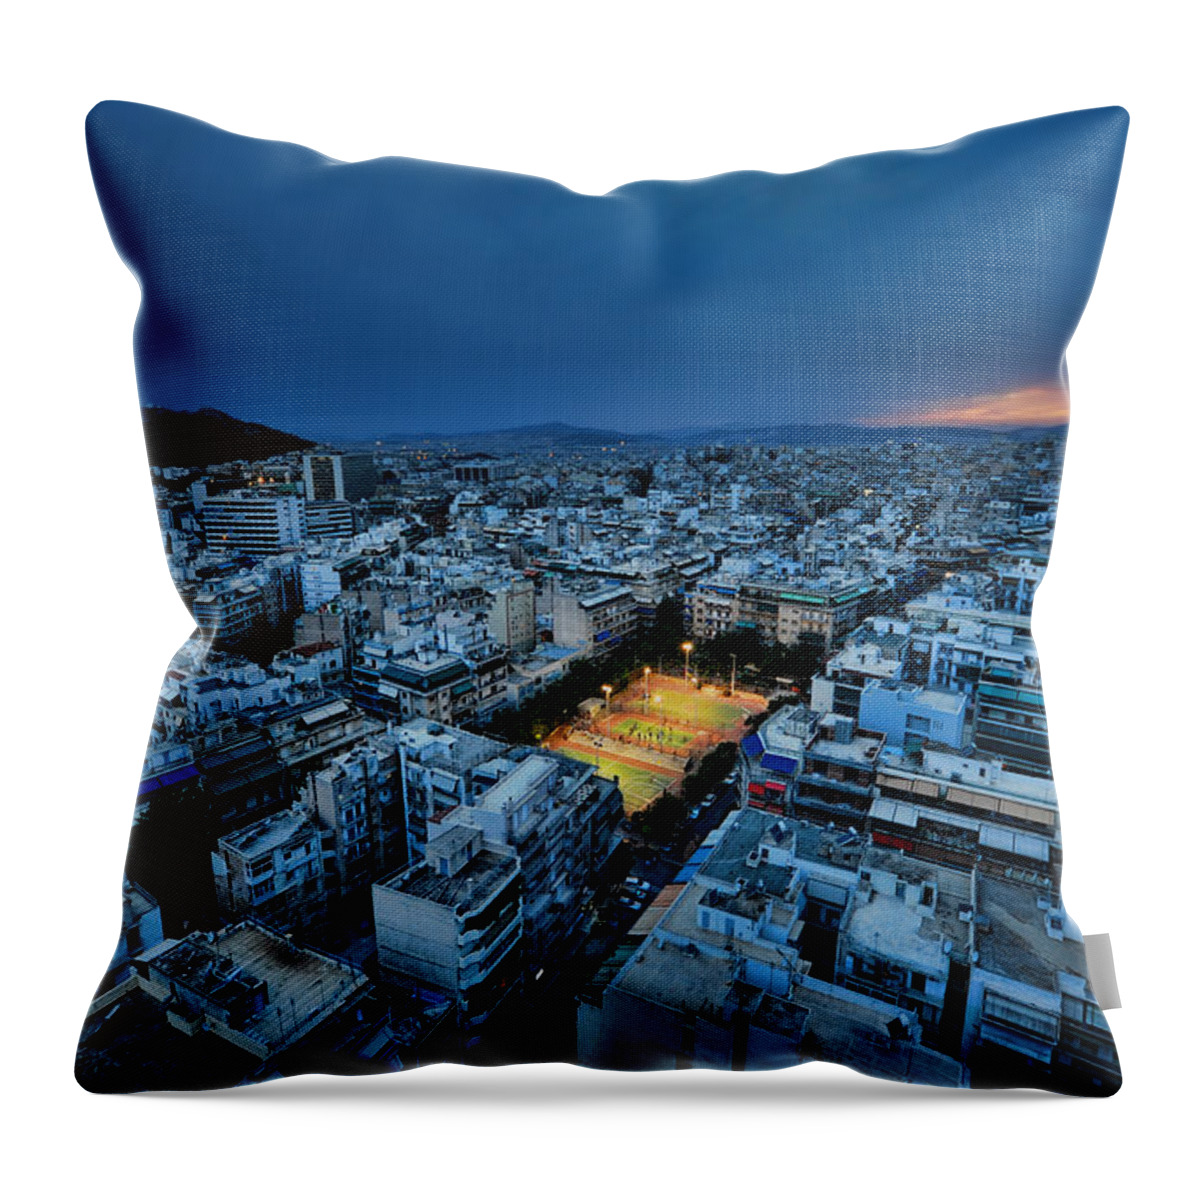 Greece Throw Pillow featuring the photograph Blue Hour In Athens by Nemo Galletti